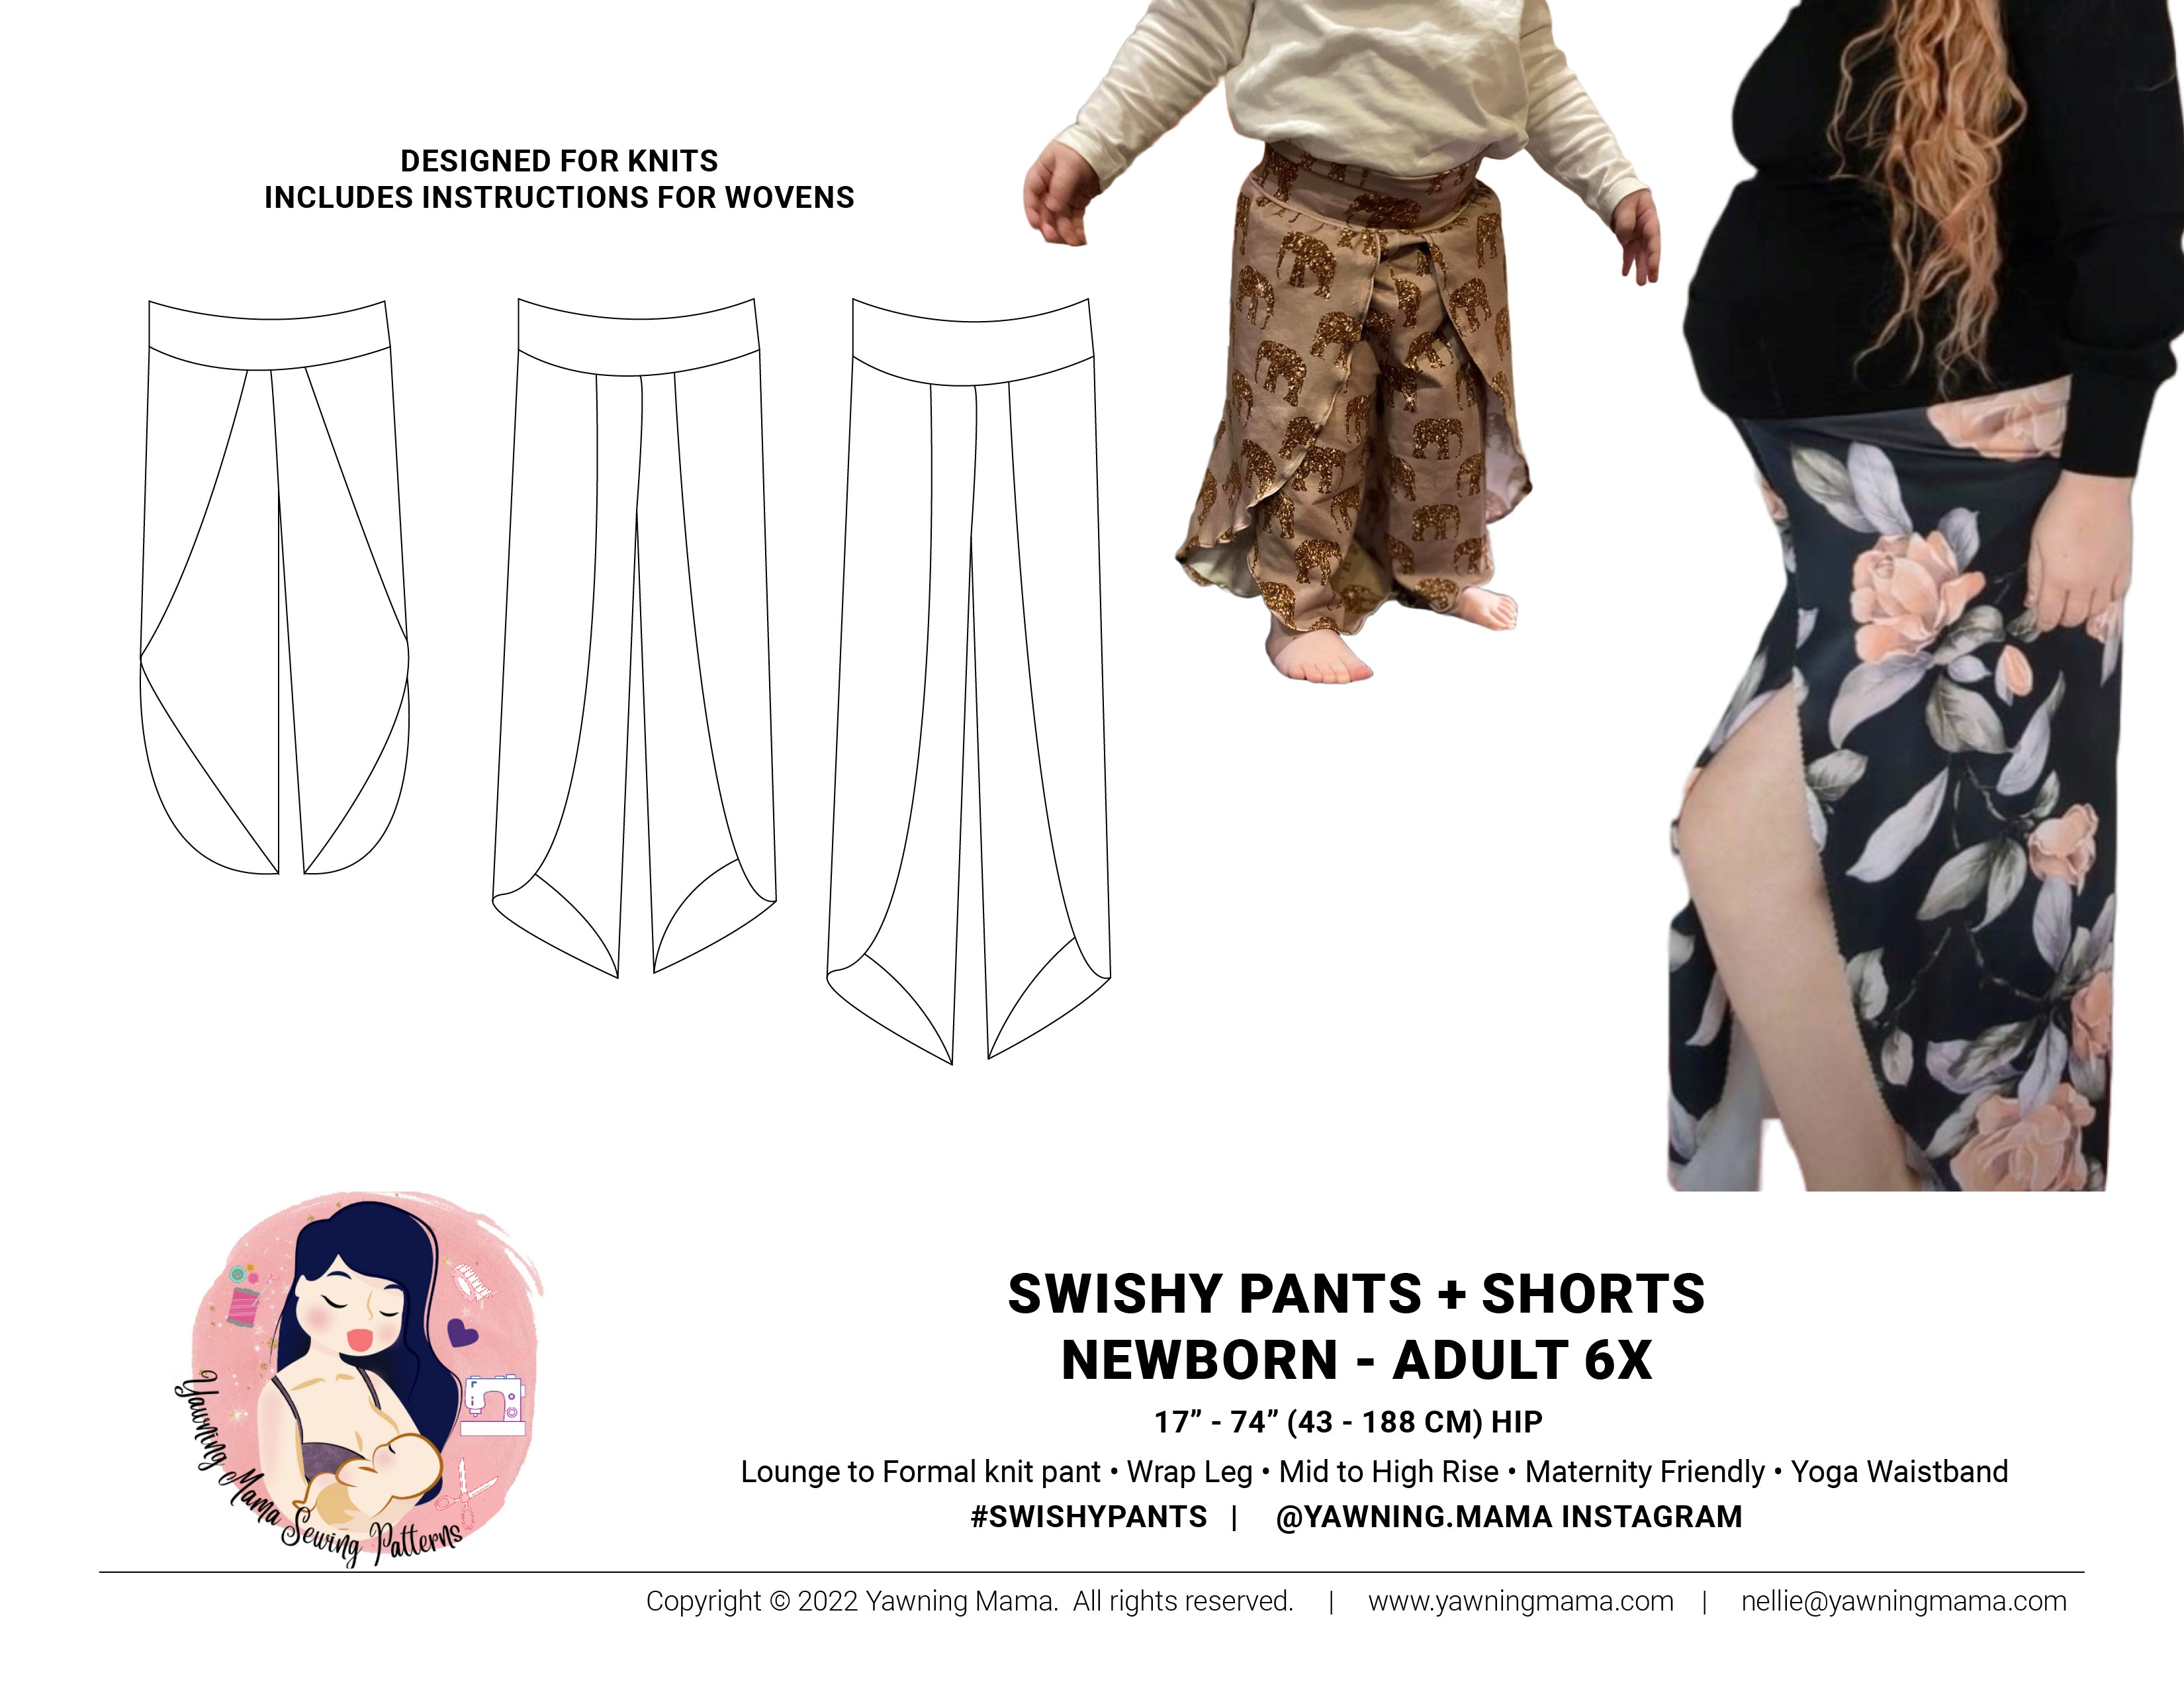 Quick Sewing Project: Wrap Pants - The Shapes of Fabric